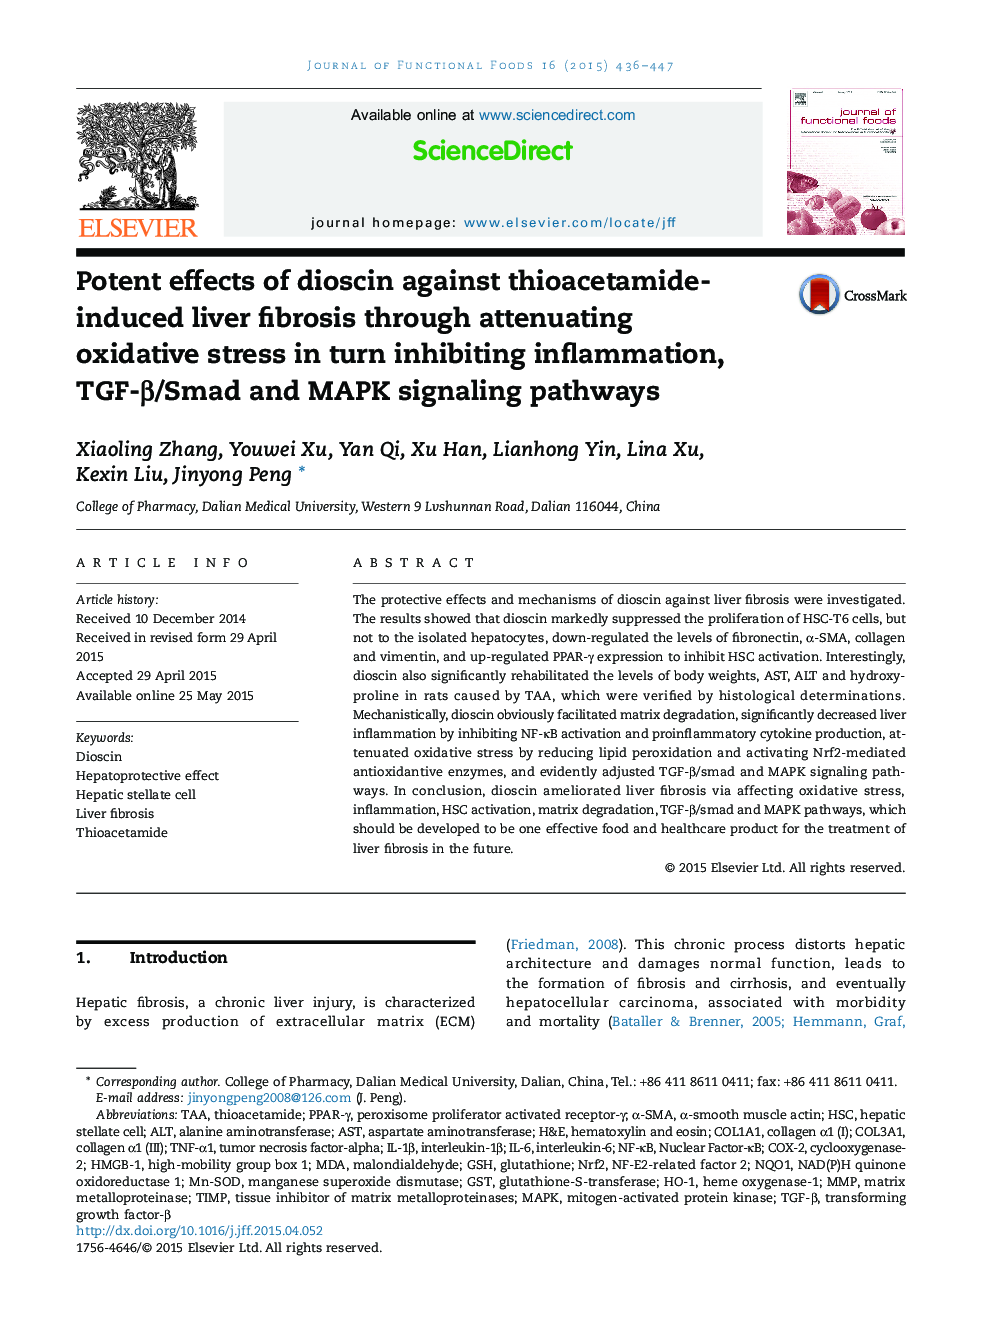 Potent effects of dioscin against thioacetamide-induced liver fibrosis through attenuating oxidative stress in turn inhibiting inflammation, TGF-β/Smad and MAPK signaling pathways